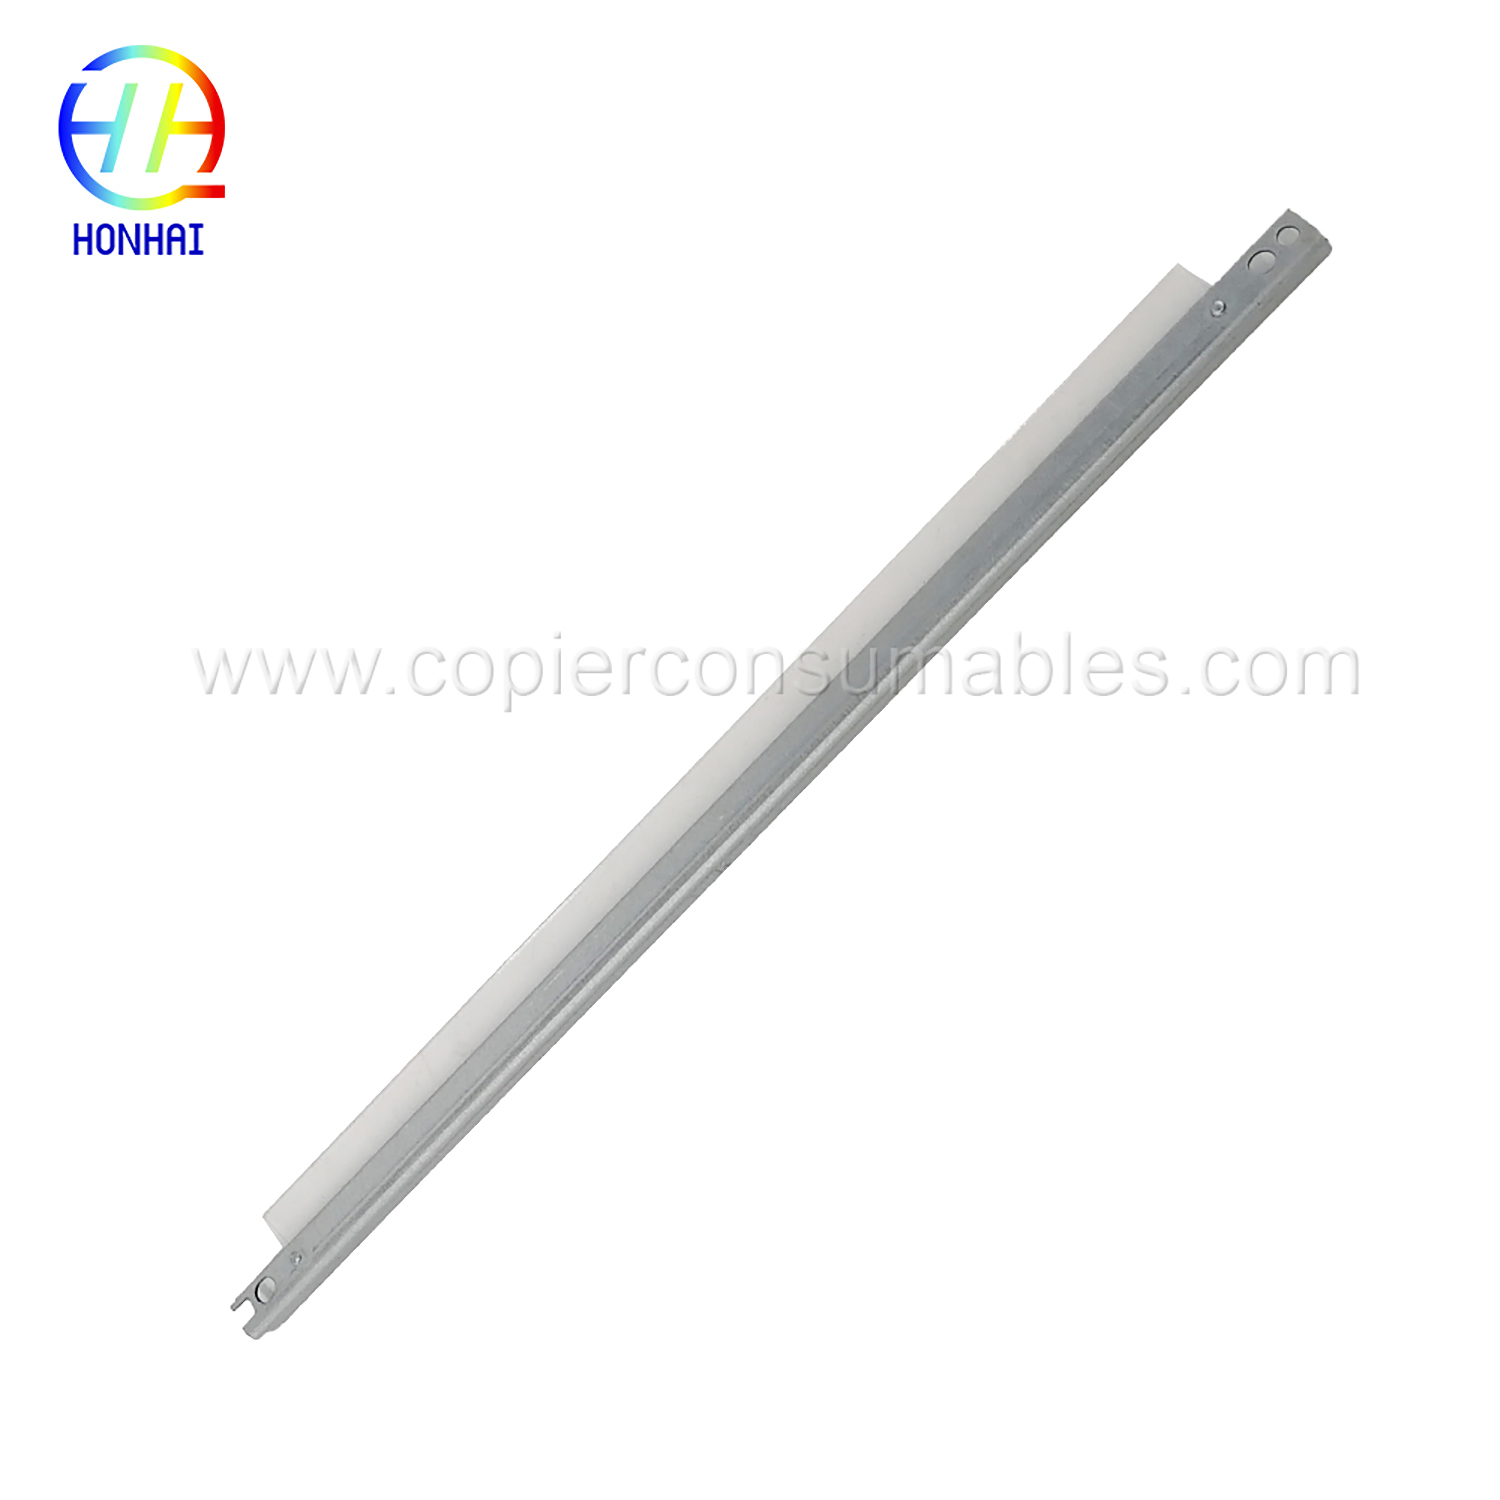 Drum Cleaning Blade for HP 1020 M1319 3015 3020 3030 3052 3050 3055 1010 1020 1022 M1005